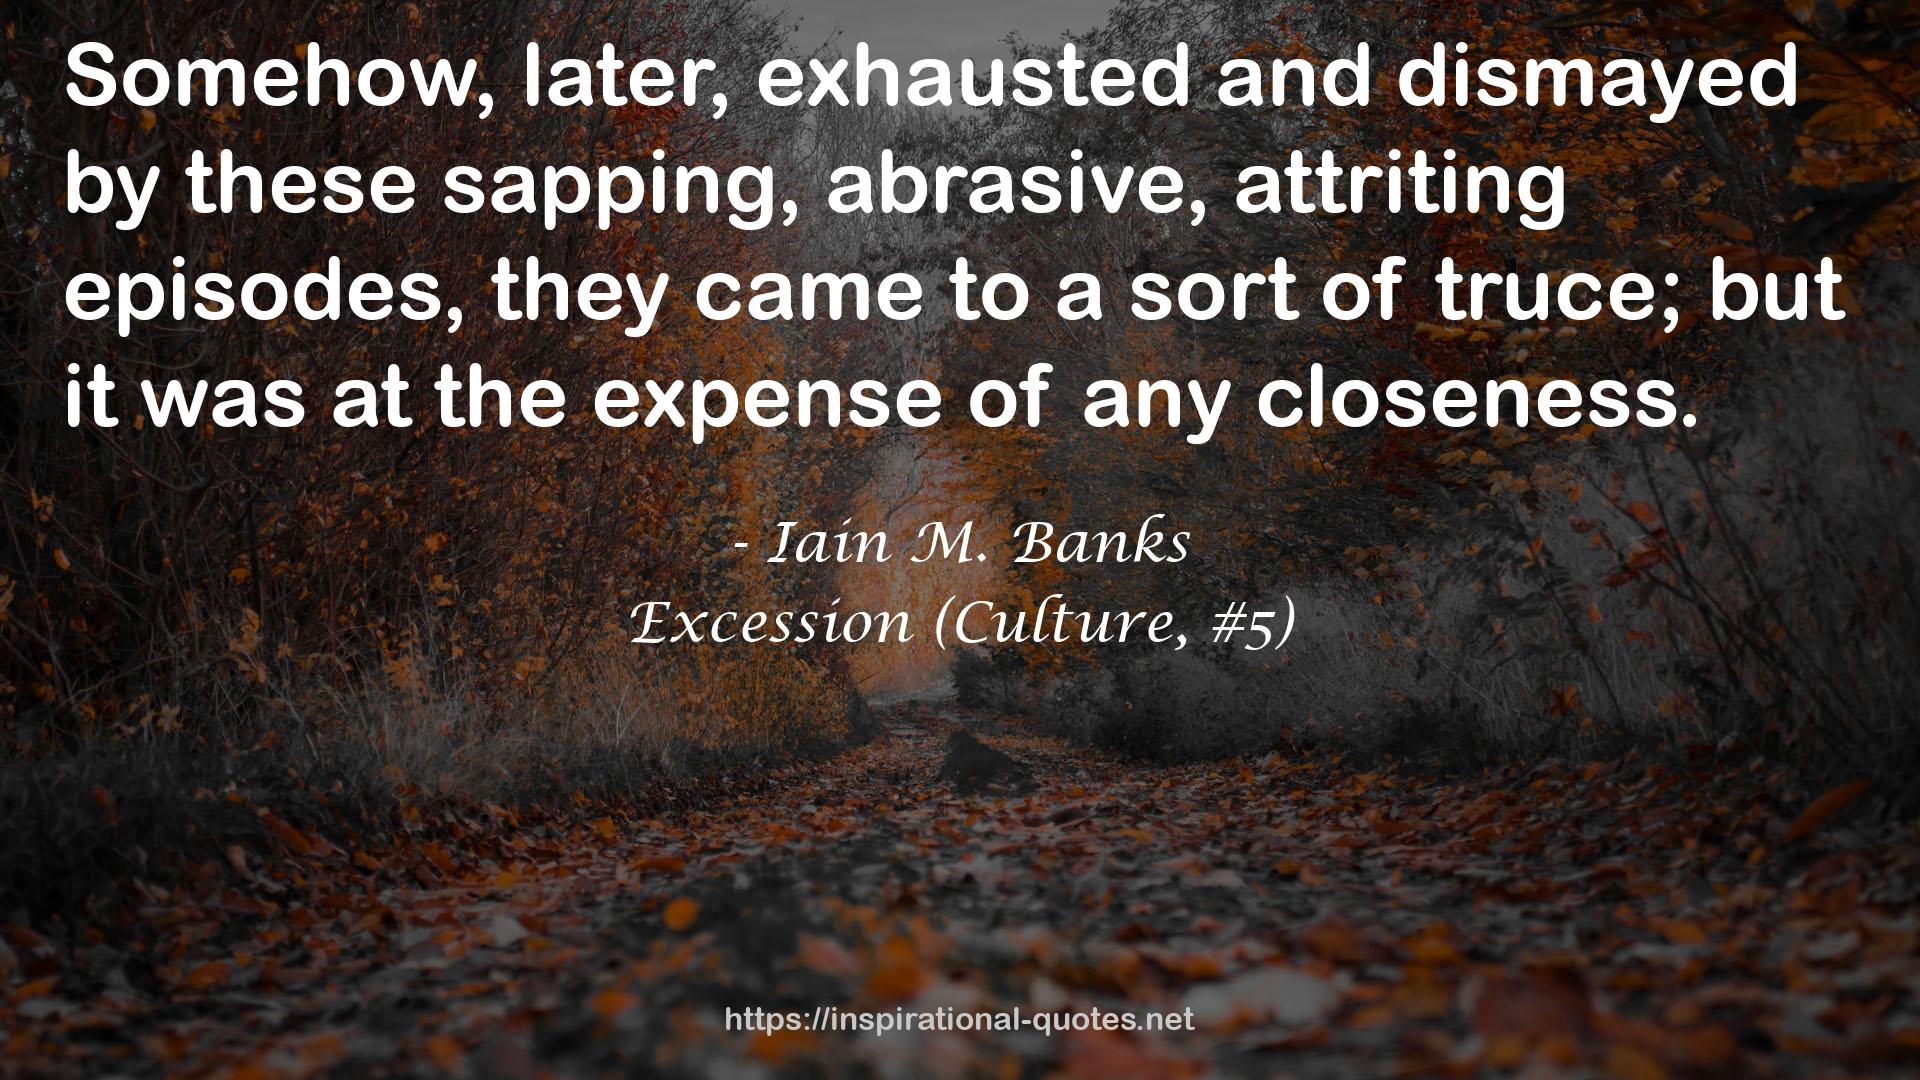 Iain M. Banks QUOTES